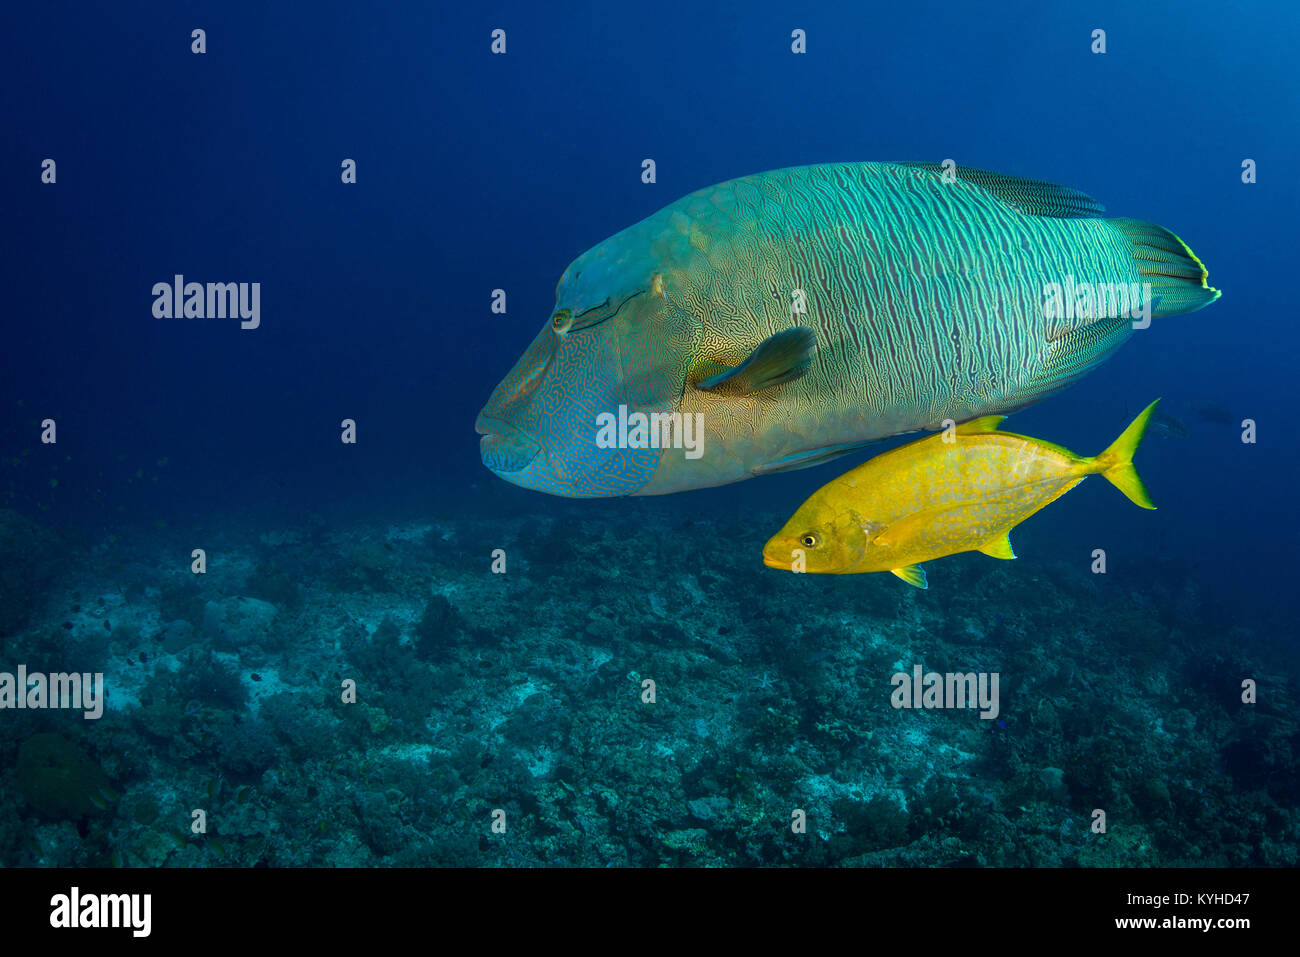 A large Napoleon wrasse swimming over a reef accompanied by a golden trevally – they hunt smaller fish together, in Misool, Raja Ampat, Indonesia. Stock Photo